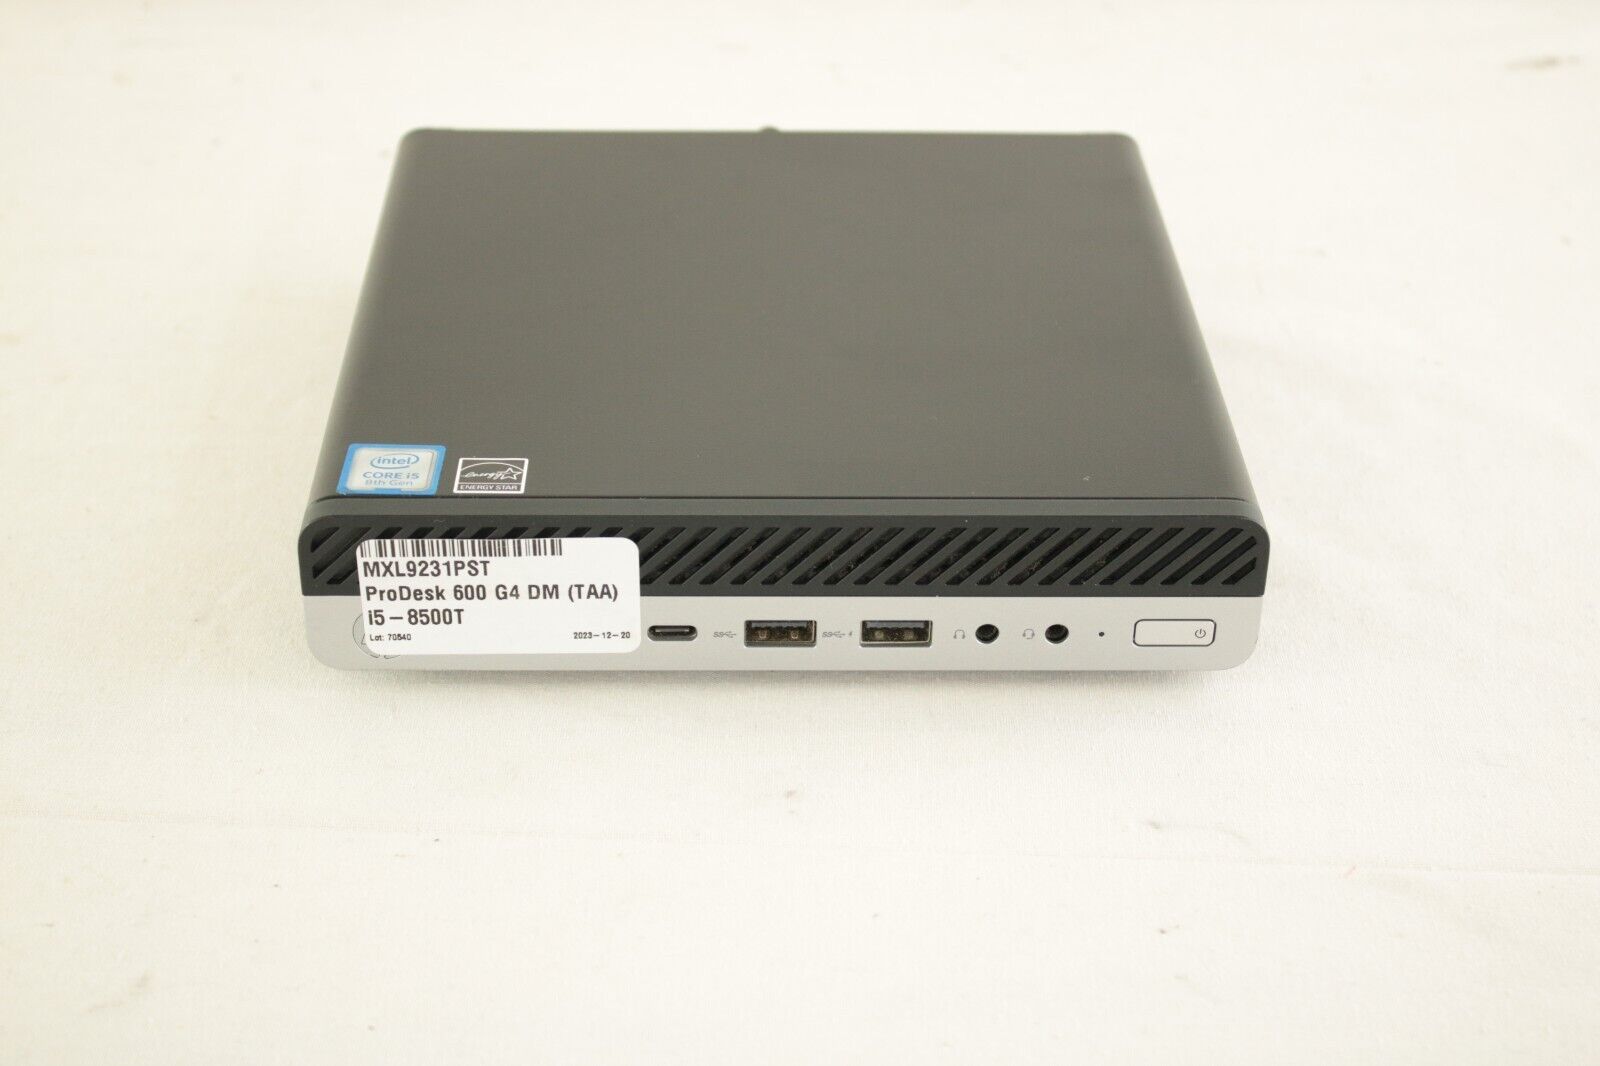 HP ProDesk 600 G4 DM w/ Core i5-8500T CPU @2.1GHz - 8GB RAM - No HDD/SSD or OS